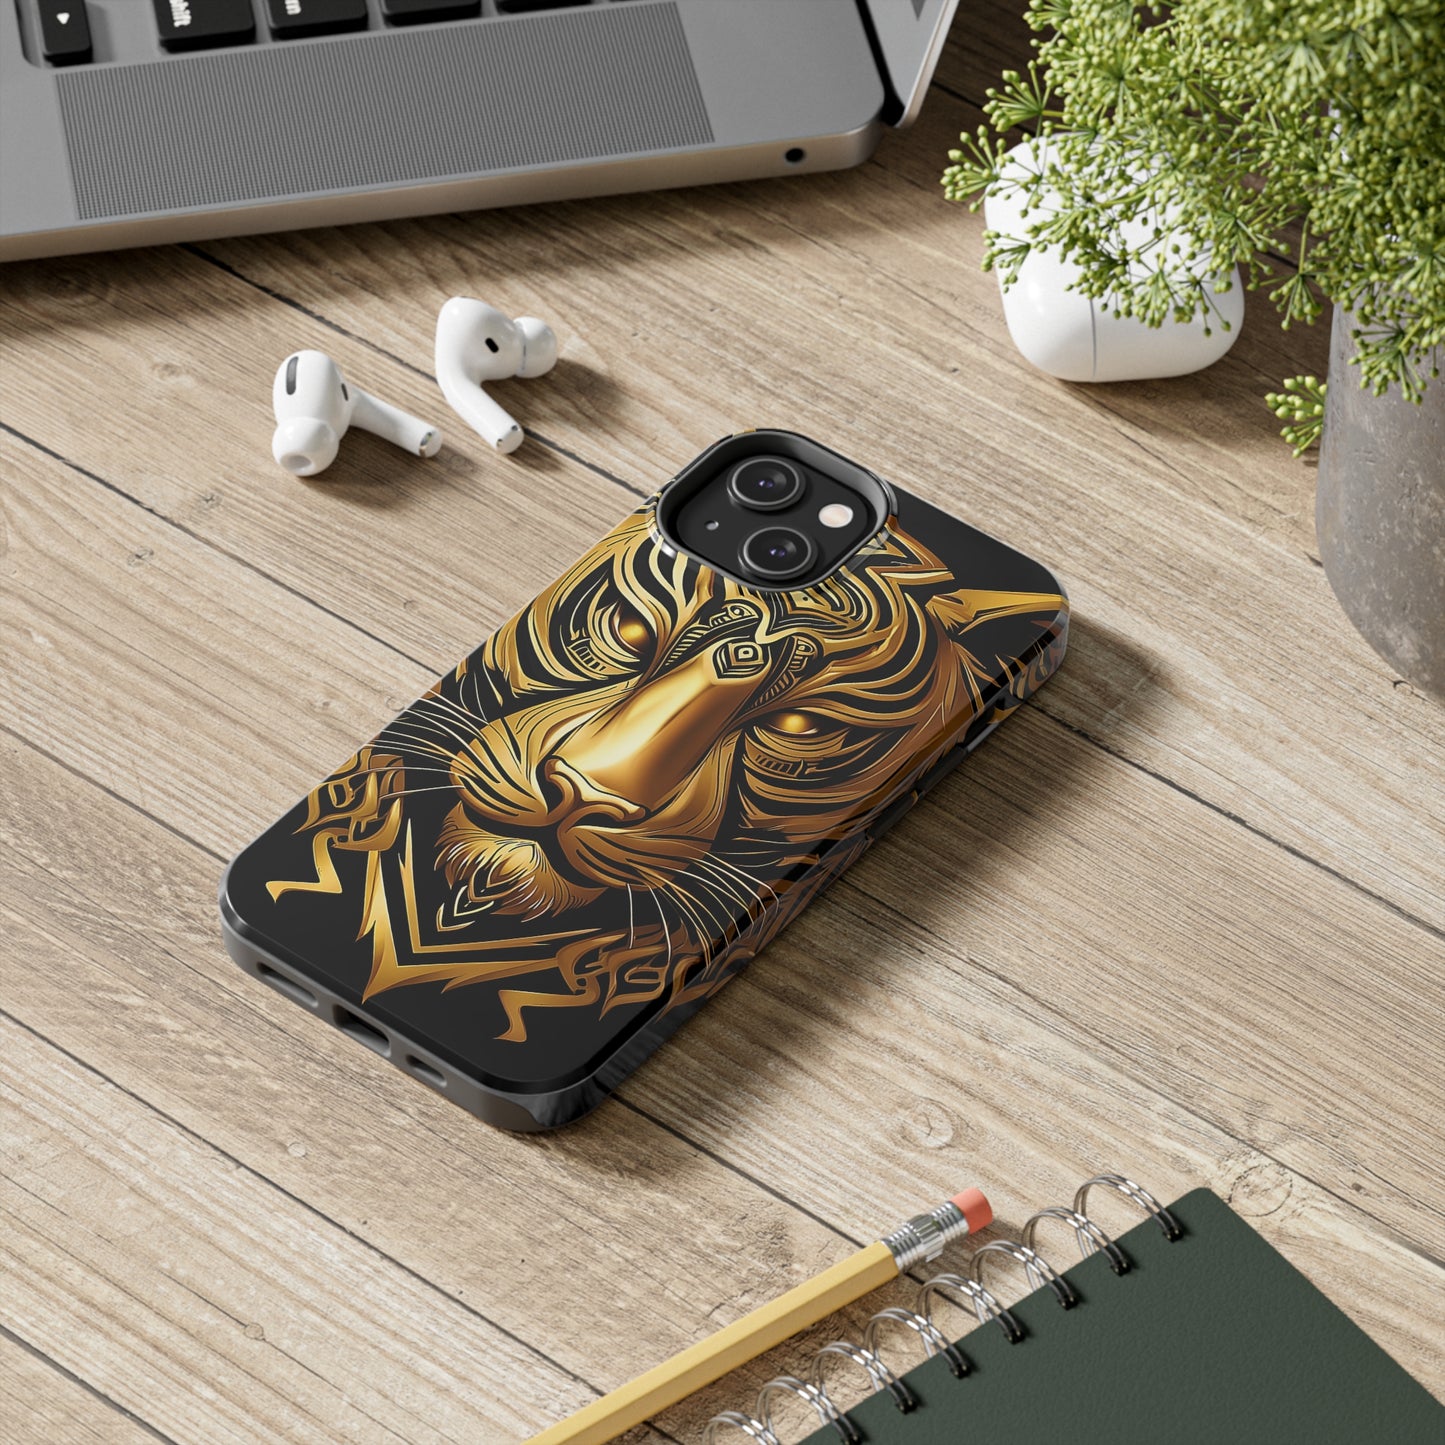 Big Cat Themed iPhone 14 Tough Case - Gold Tribal Tiger Head Printed on Phone Case for iPhone 14 on desk